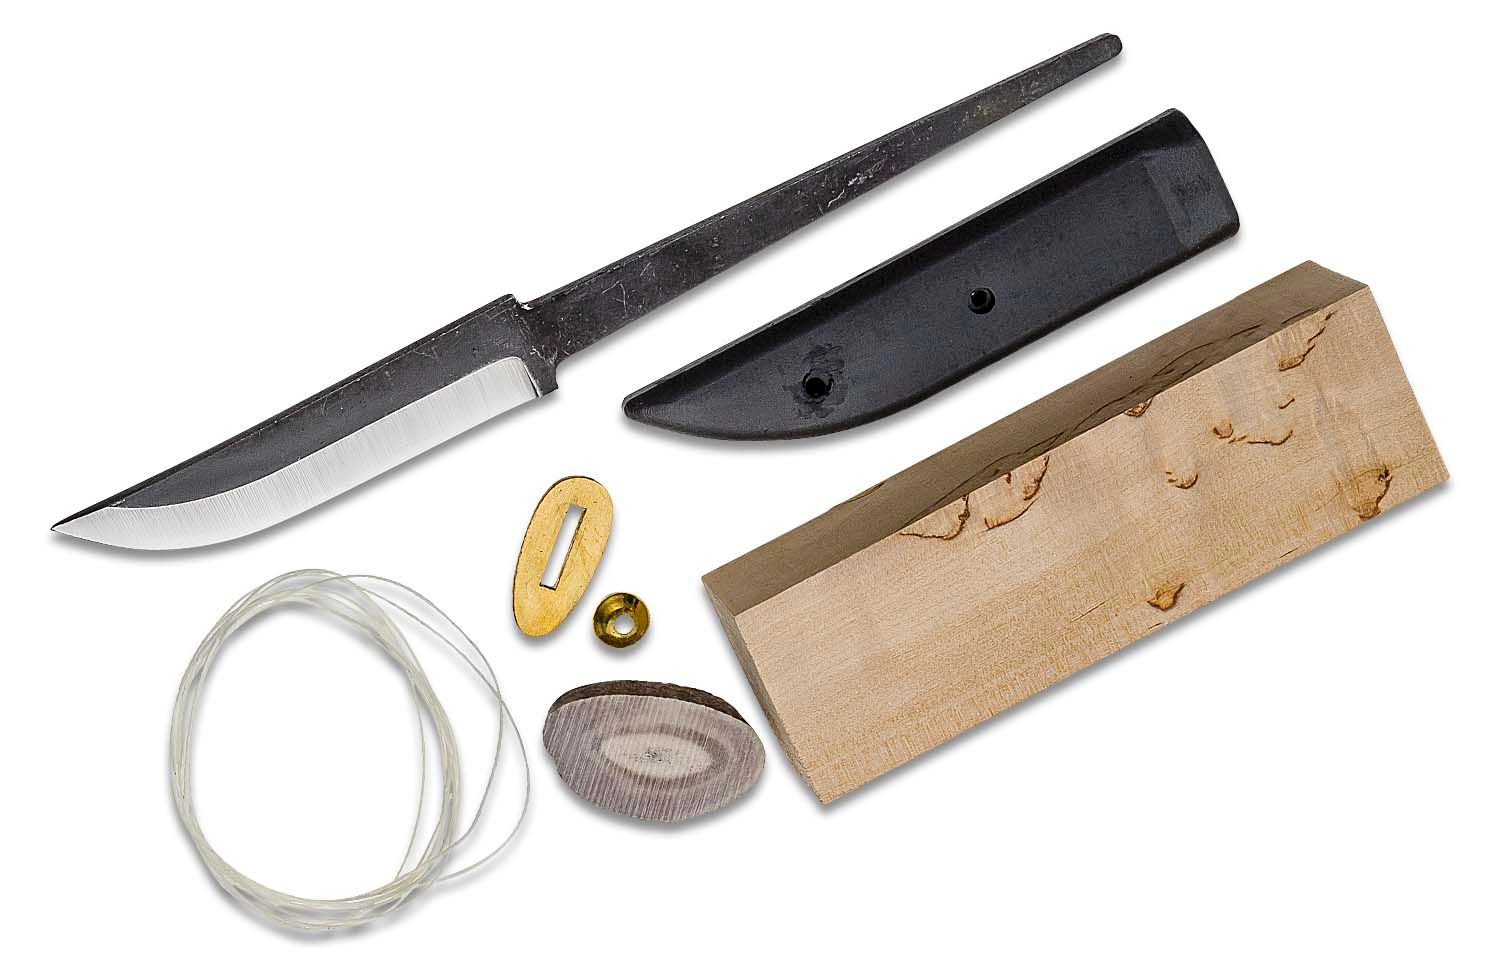 How to Make a Knife From a Kit